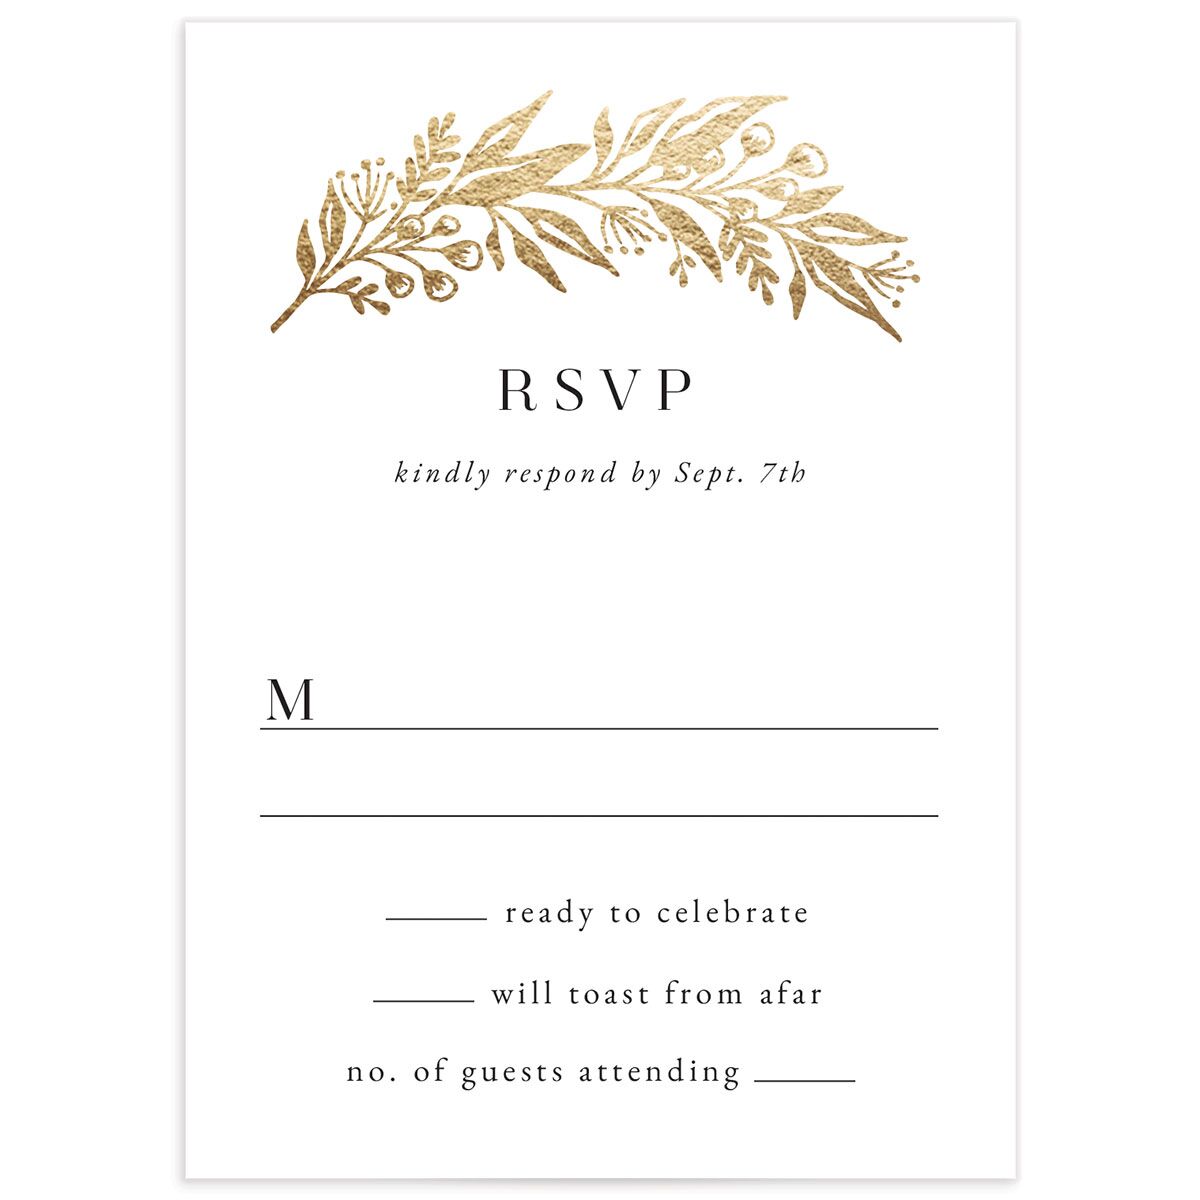 Gilded Garland Wedding Response Cards front